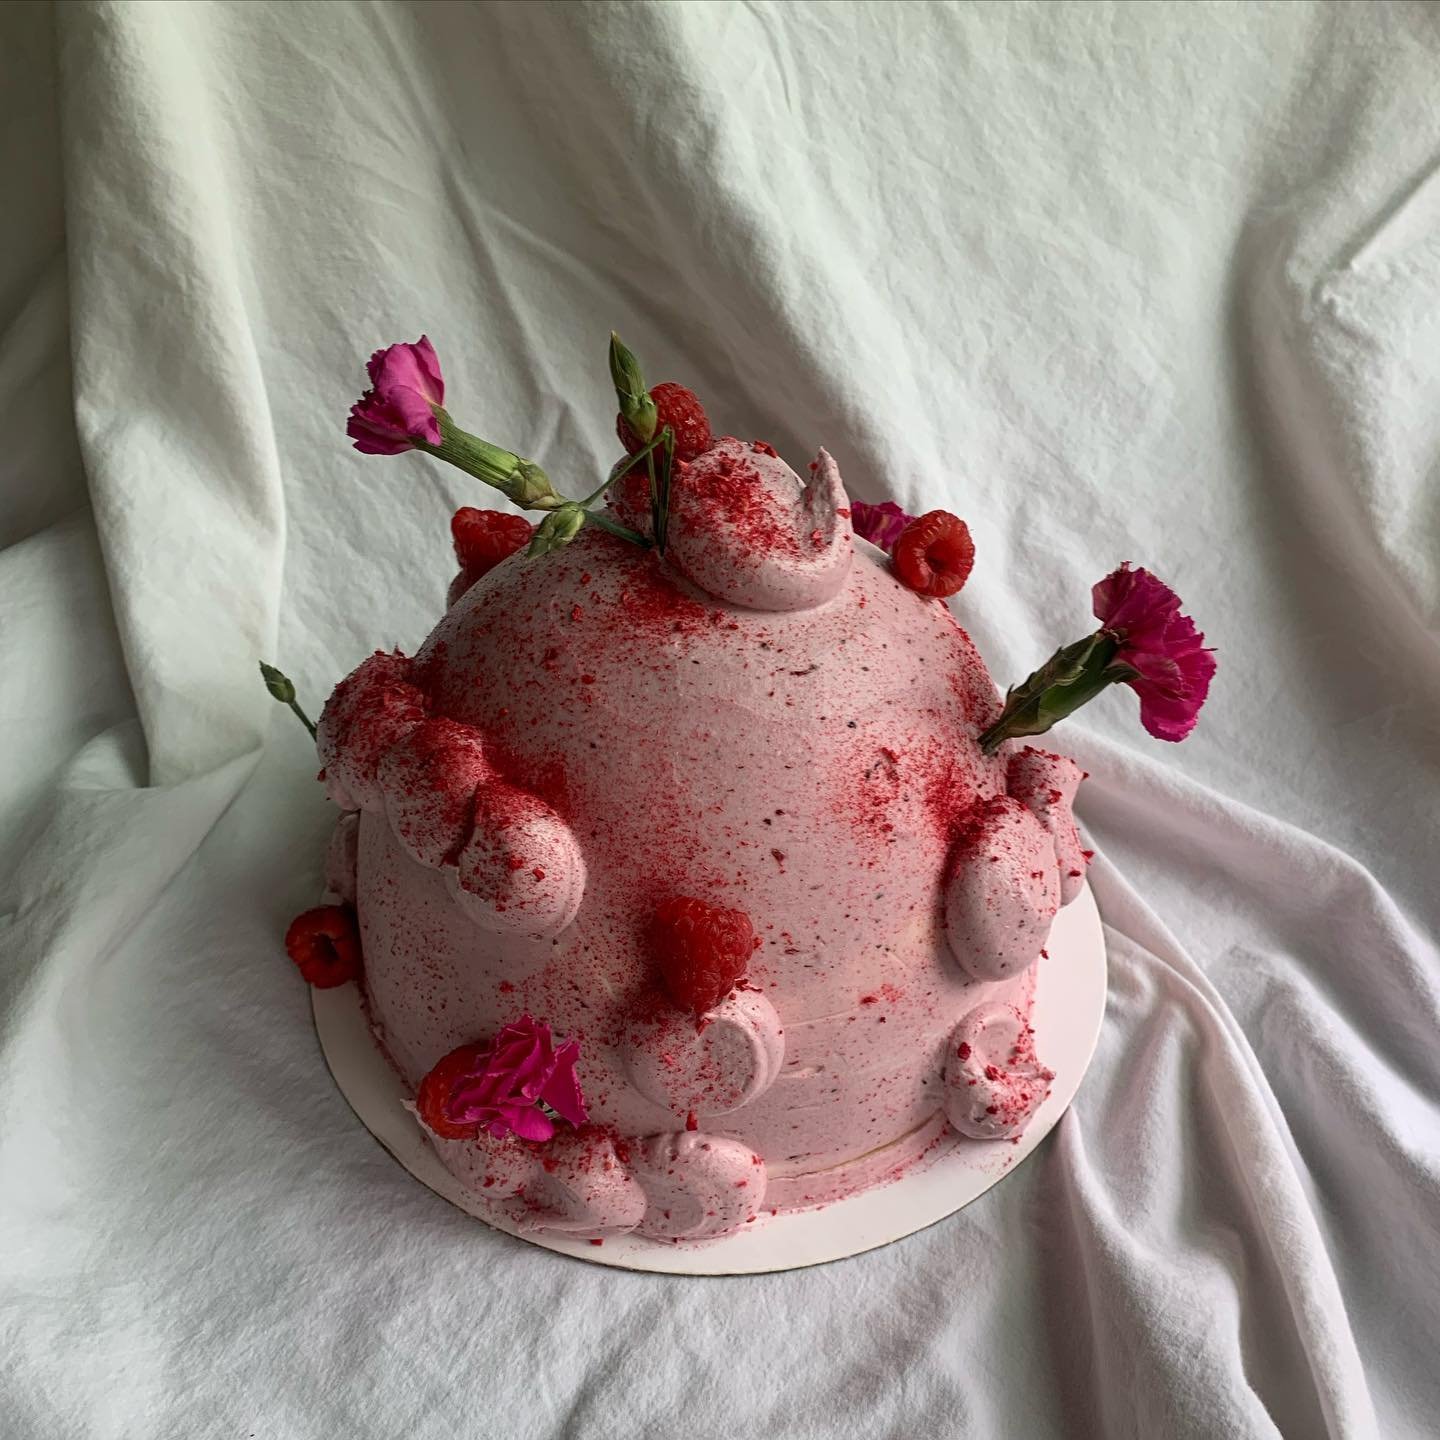 Baby dome cake :)

Almond cake, blackberry curd, almond brown butter frosting